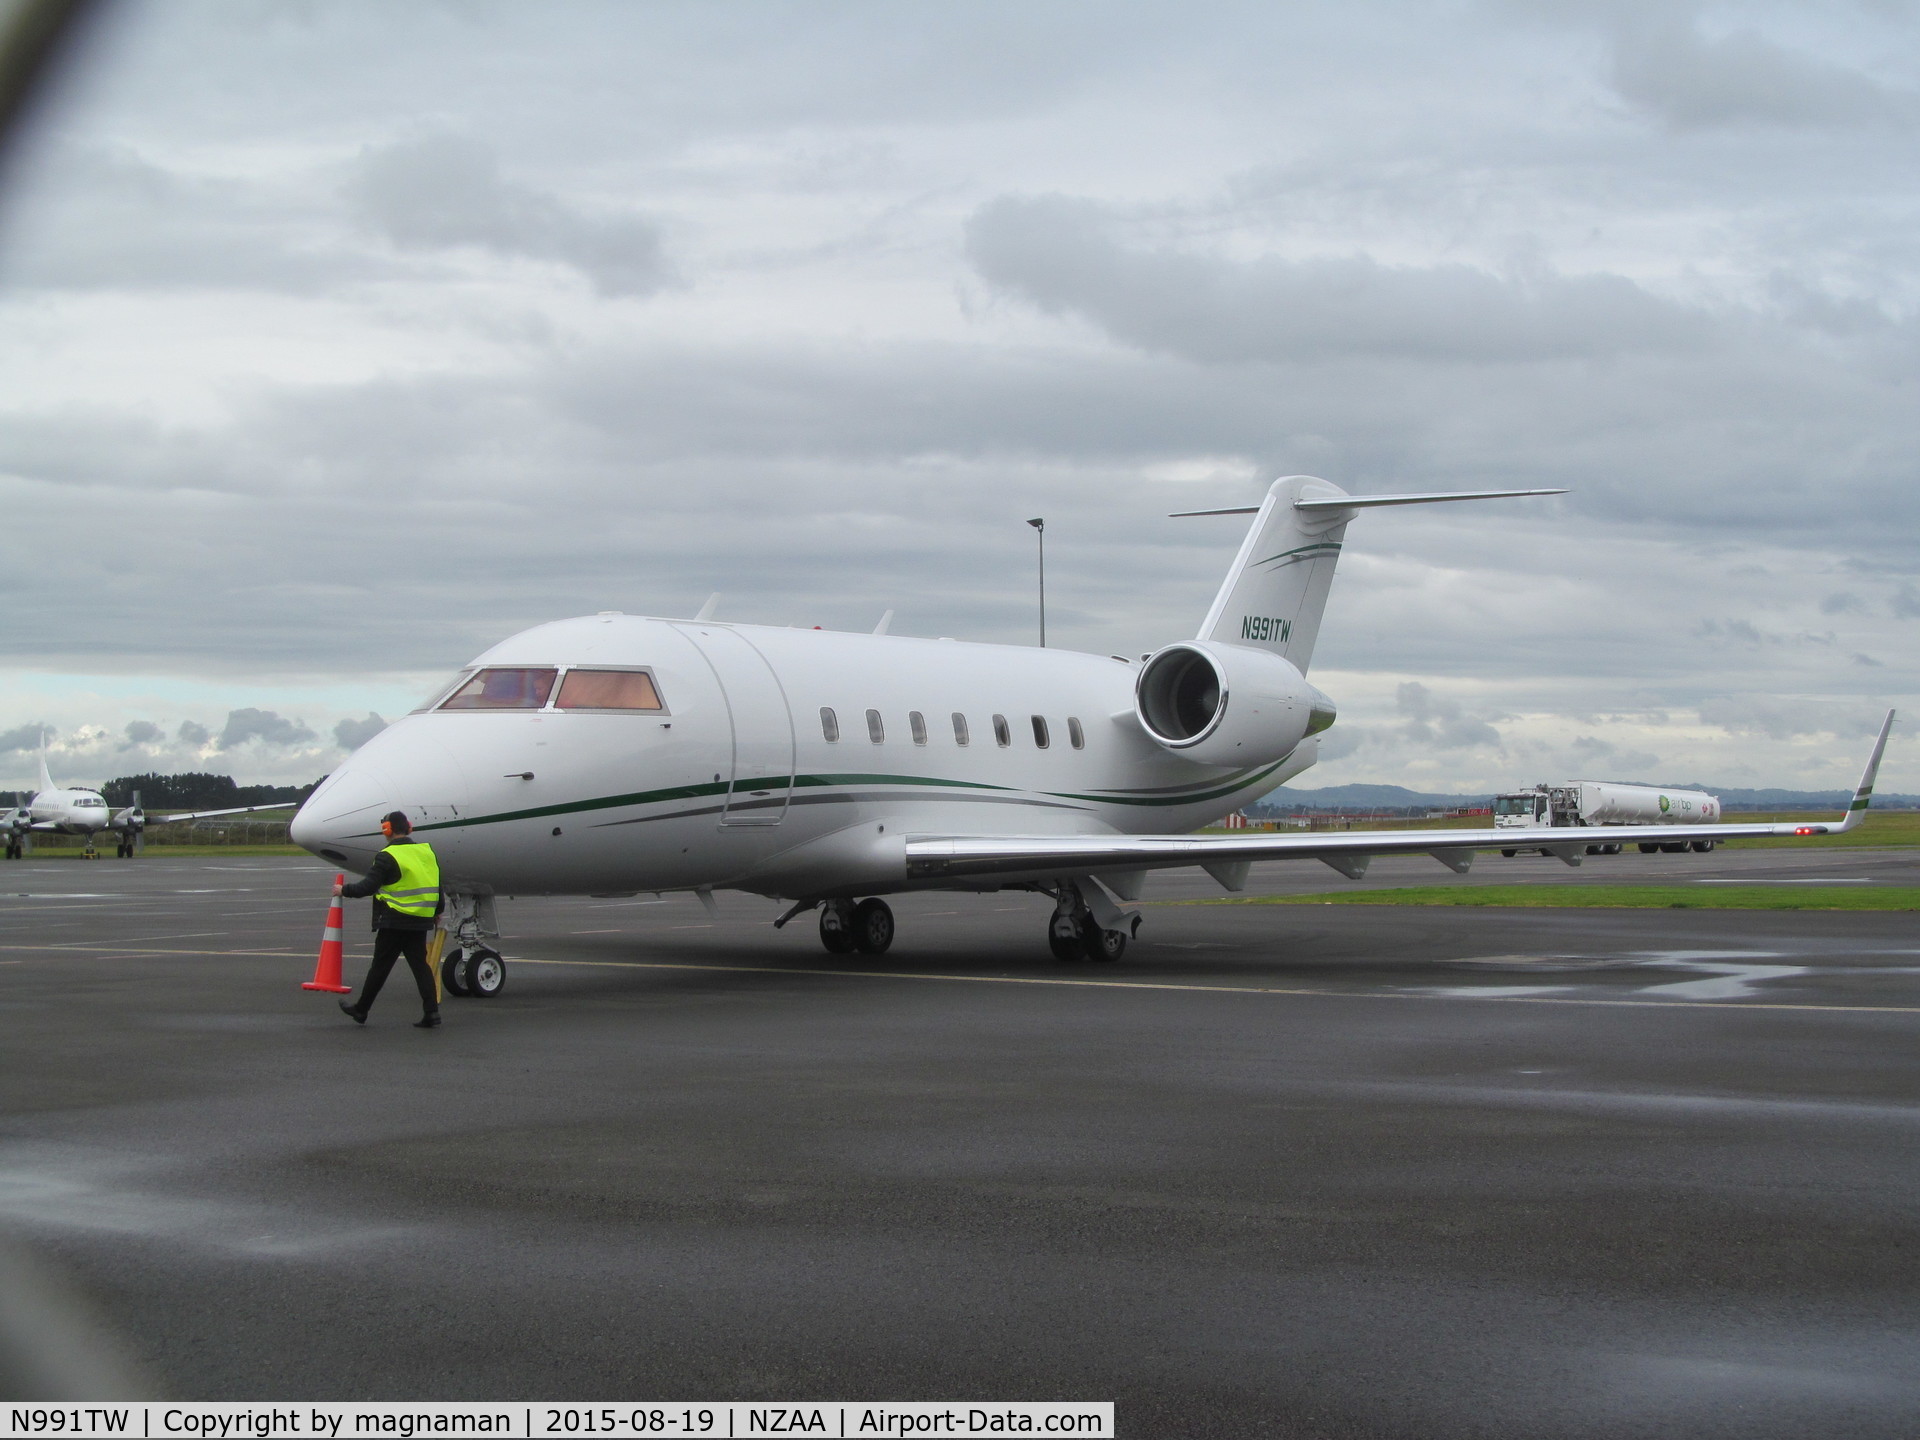 N991TW, 1997 Canadair Challenger 604 (CL-600-2B16) C/N 5333, on stand (through wire fence!)